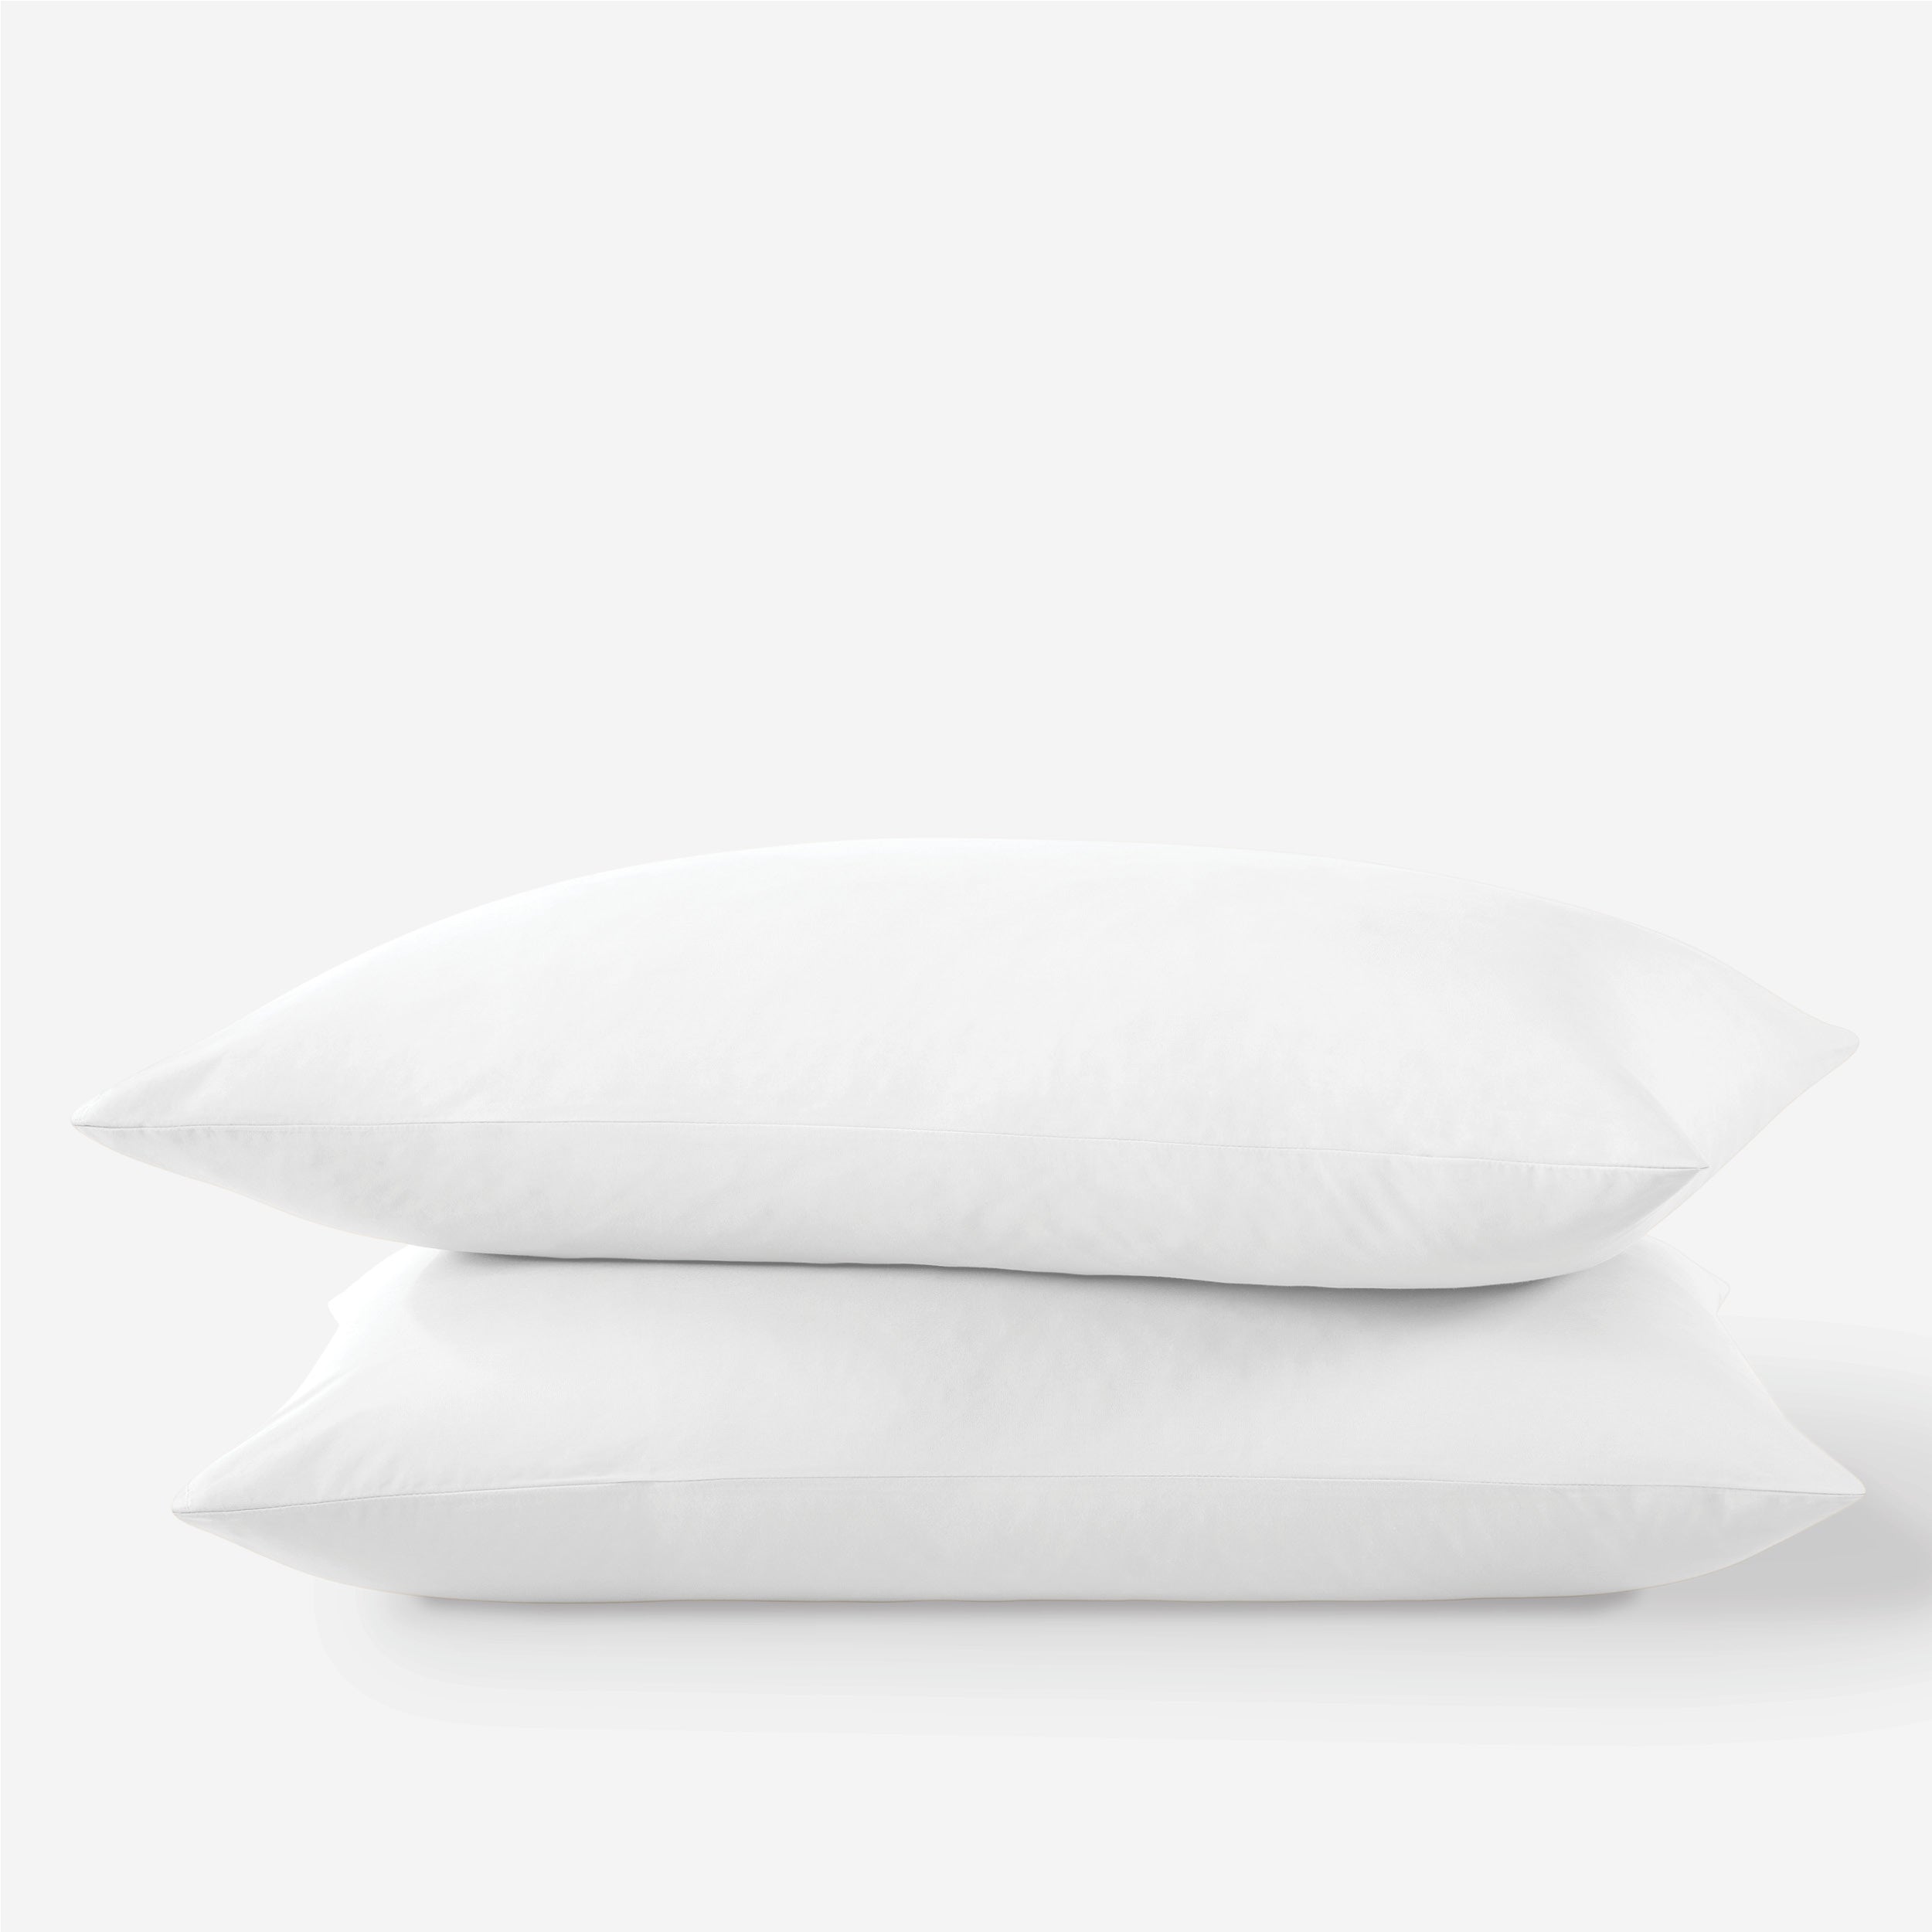 Op Pillowcase White Categoryimage 5D31A492 F6Cb 4Bcb A9A0 992D20F766Cb from Bare Home.